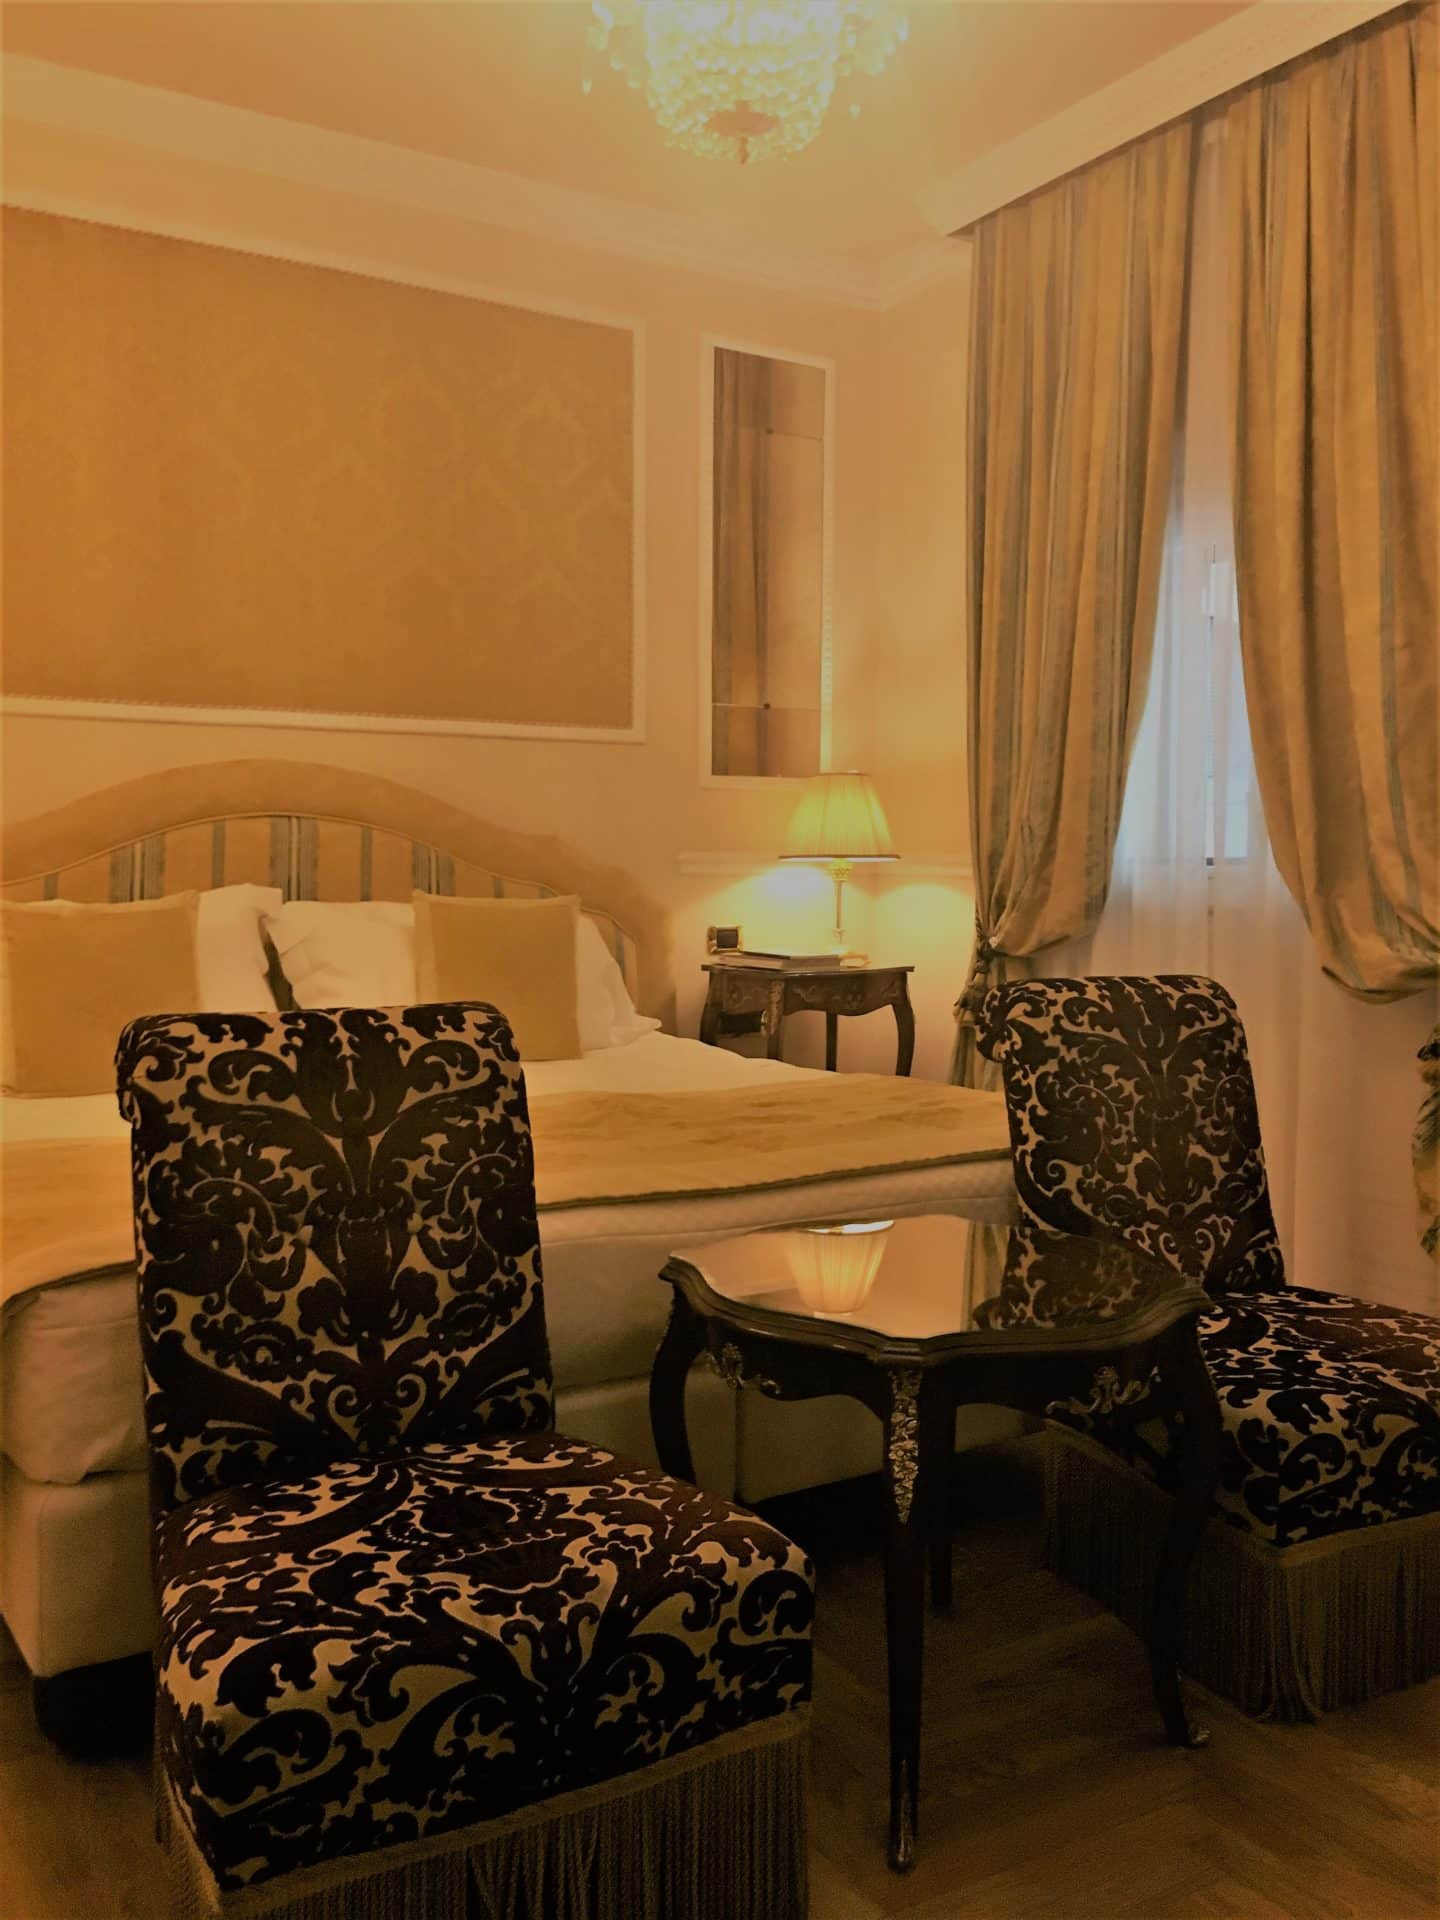 An opulent stay at The Bernini Palace Hotel, Florence. TWo floral chairs with a tabke in between in the superior room. The bed is behind with a stripey olive green adn cream headboard and cream duvet. The long drapey curtains match the headboarc. 